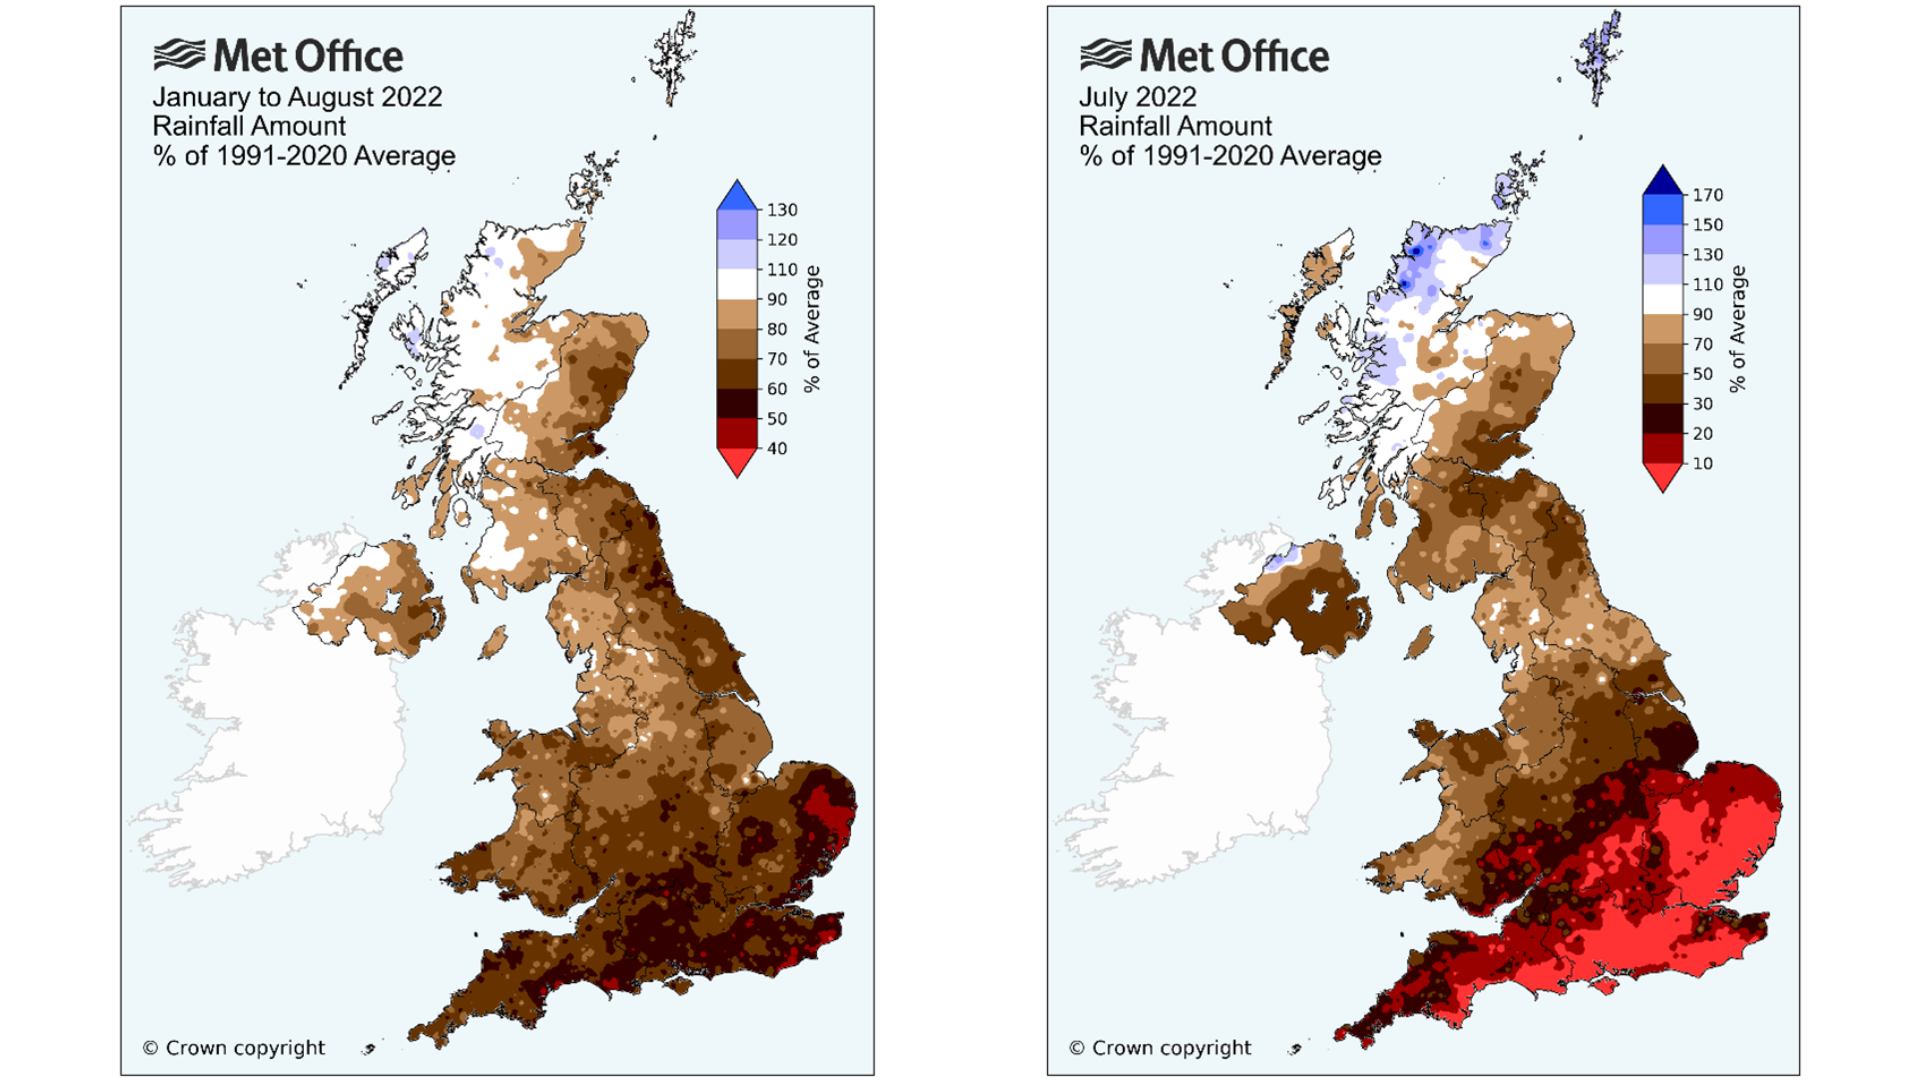 Two maps of the UK's rainfall amount. One shows rainfall amount compared to average for January to August 2022. The map shows rainfall levels well below average. The second map is July 2022's rainfall, which shows a significantly dry month, especially in the south and east of the UK.